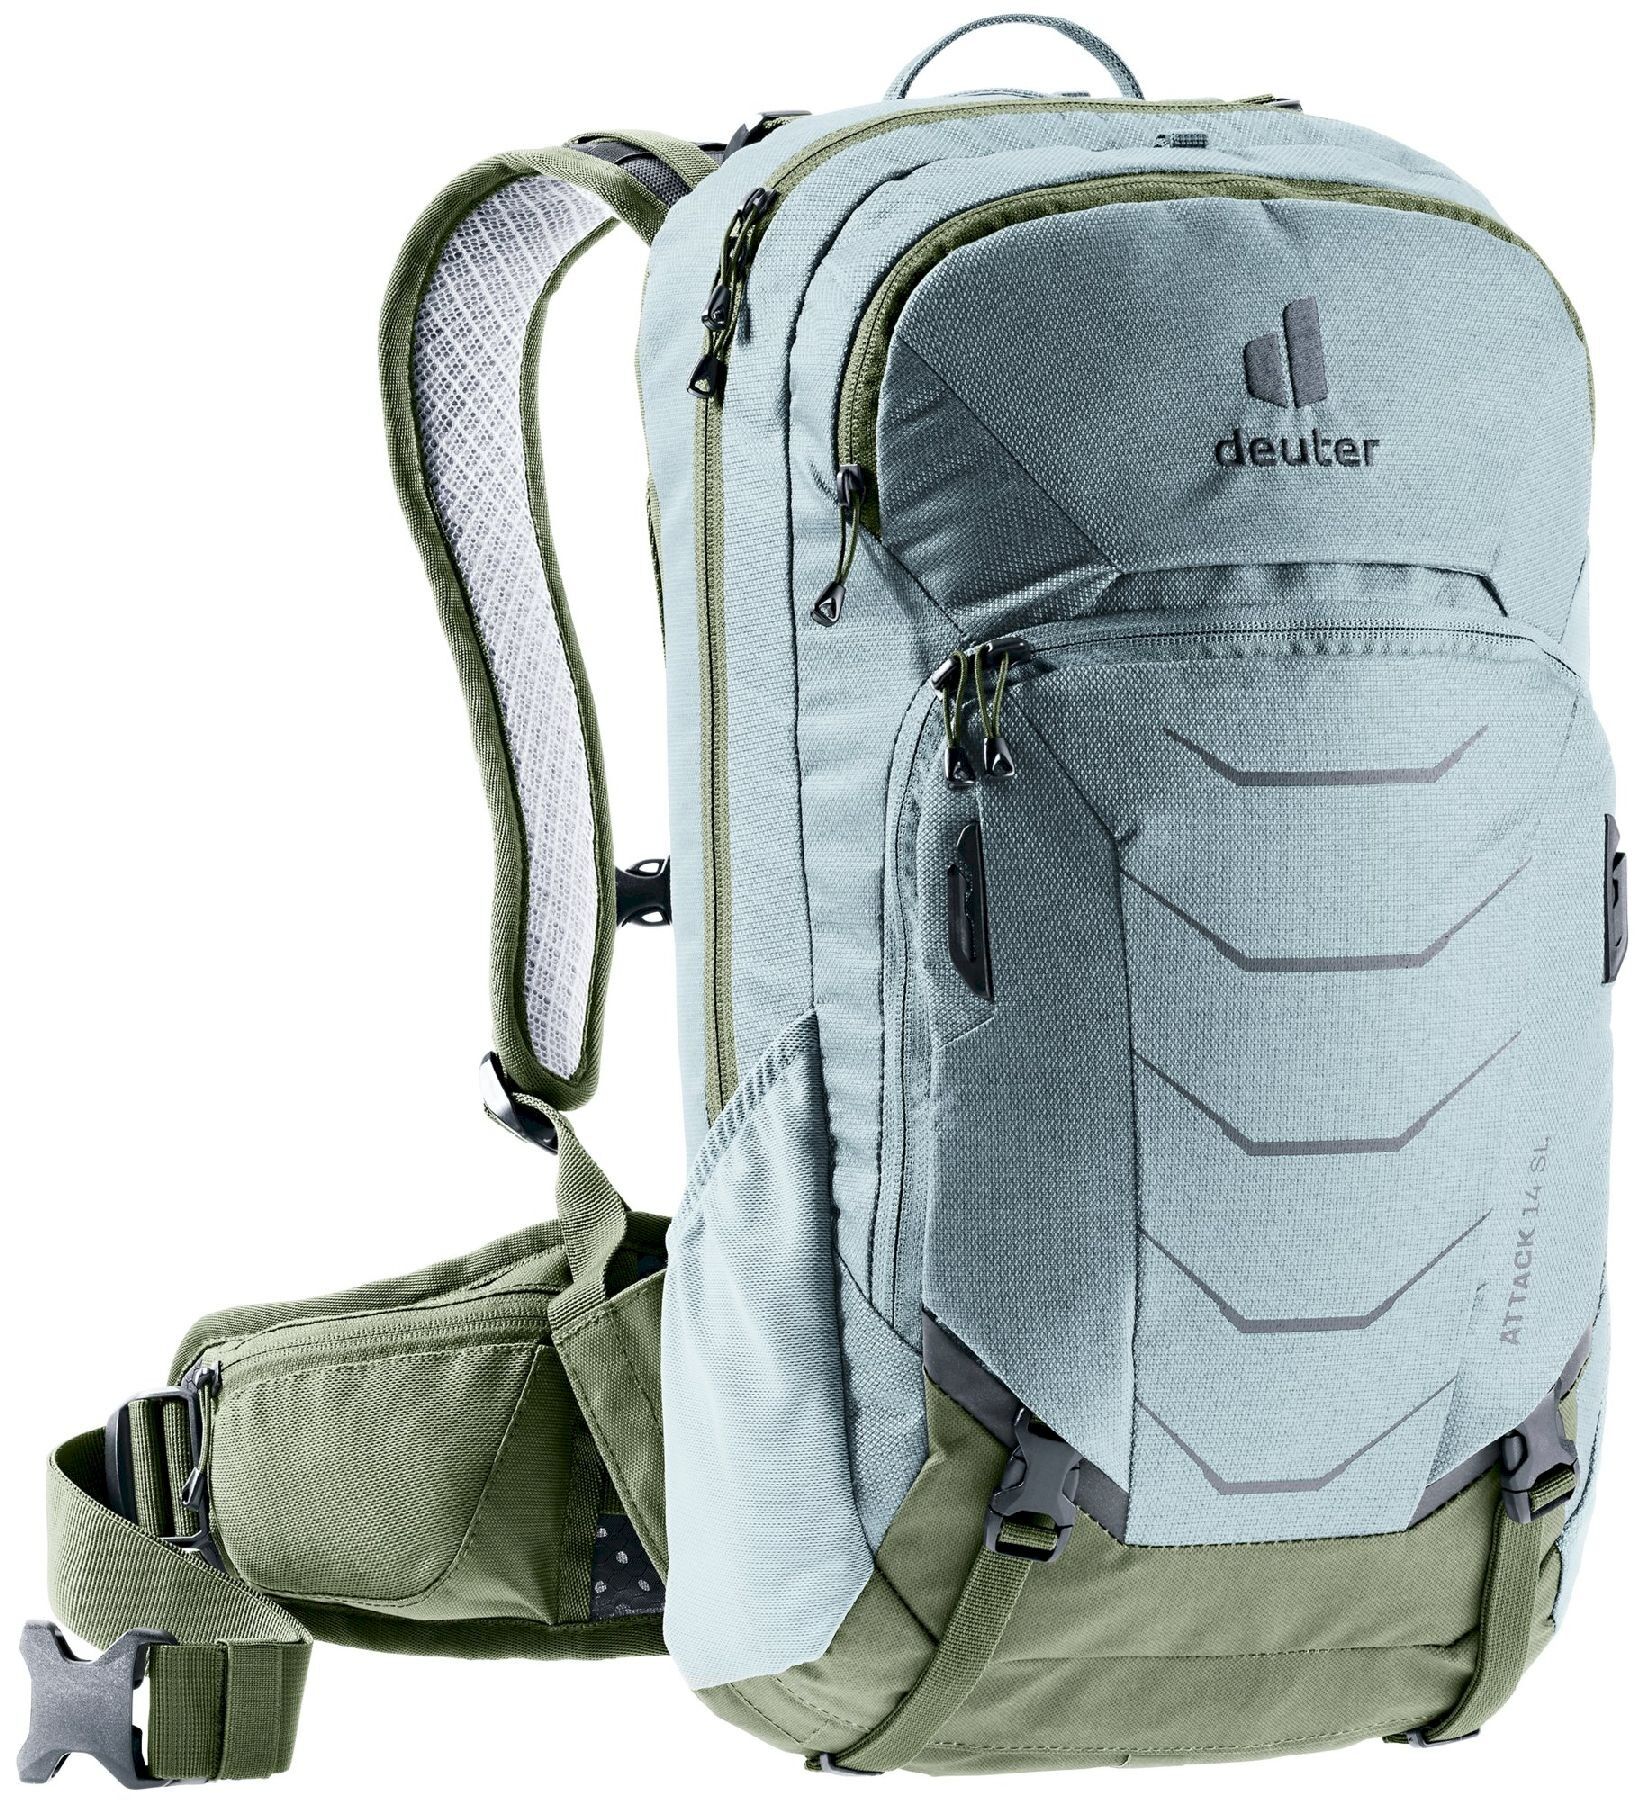 Deuter Attack 14 SL - Cycling backpack - Women's